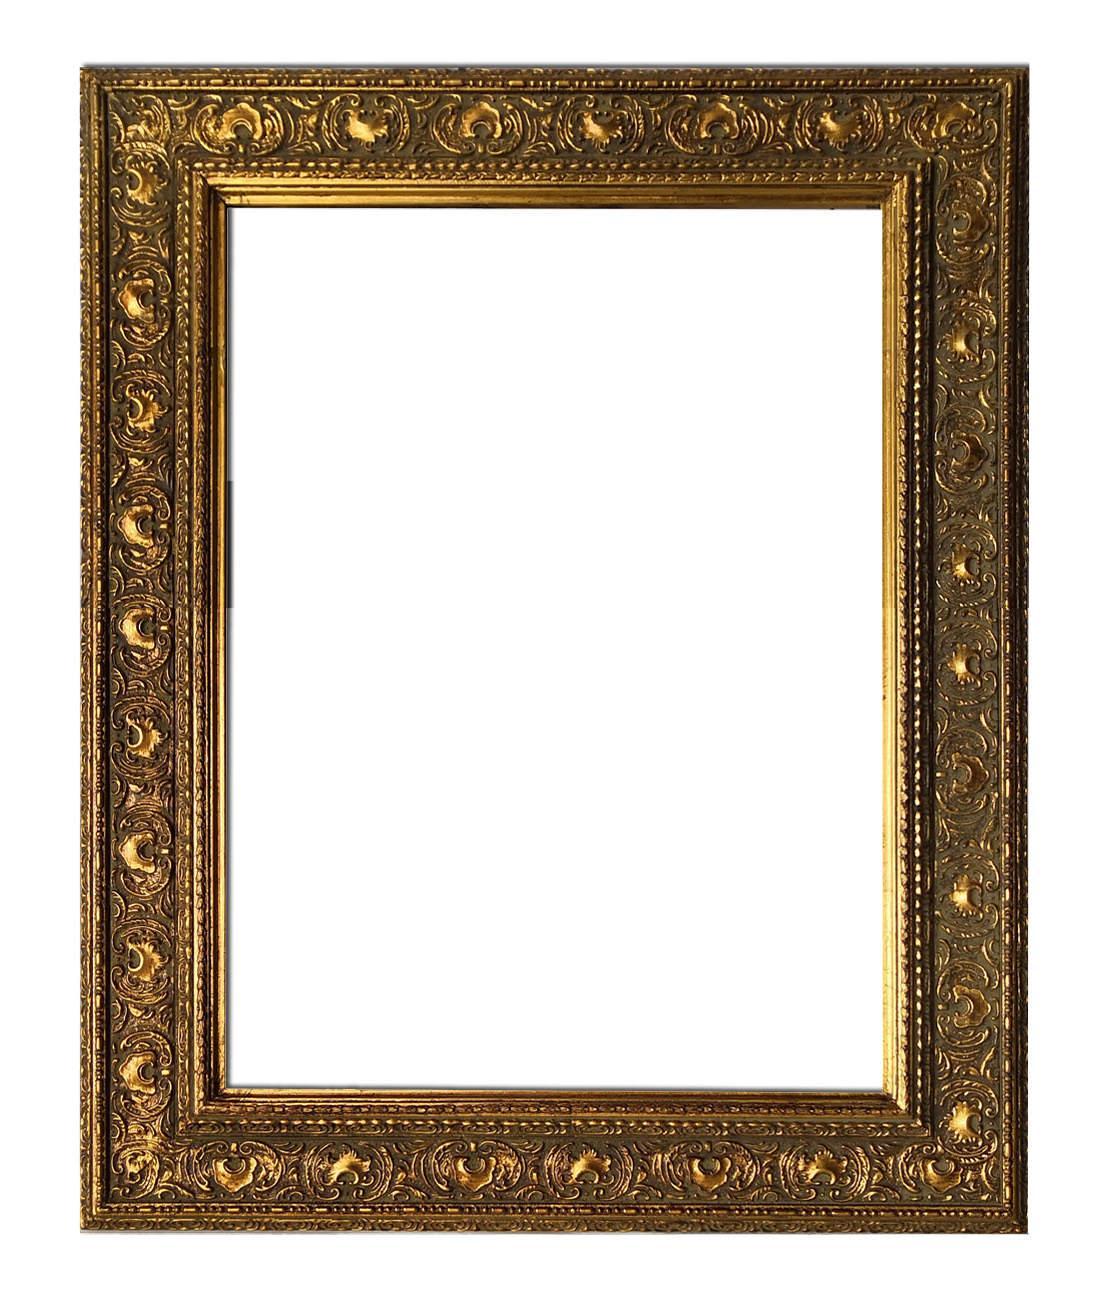 26x41 cm or 10x16 ins, wooden photo frame